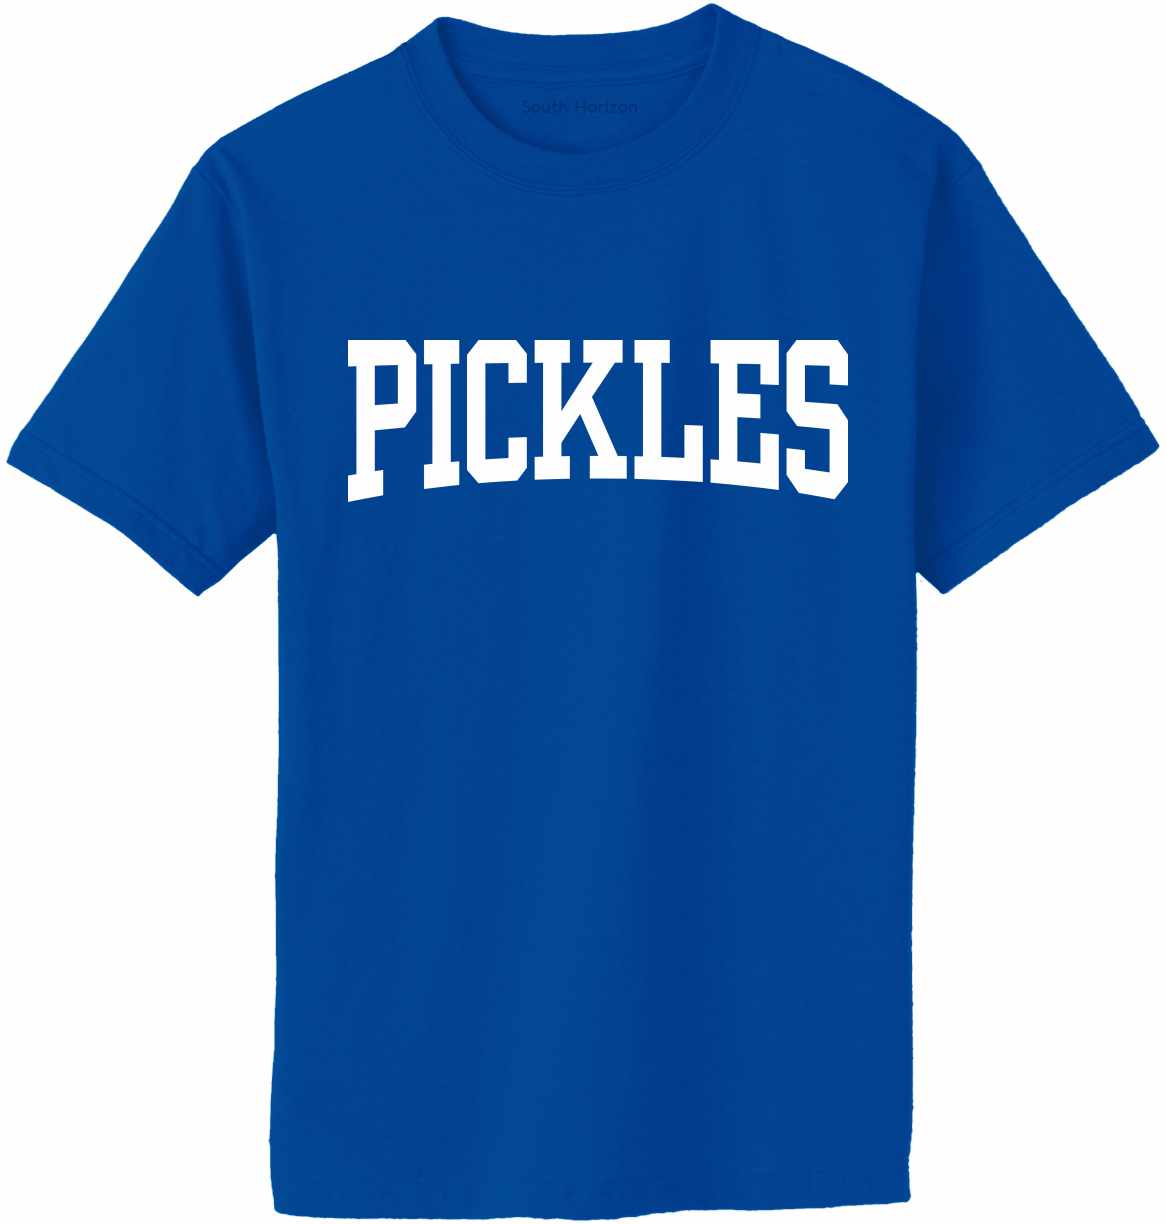 Pickles on Adult T-Shirt (#1384-1)